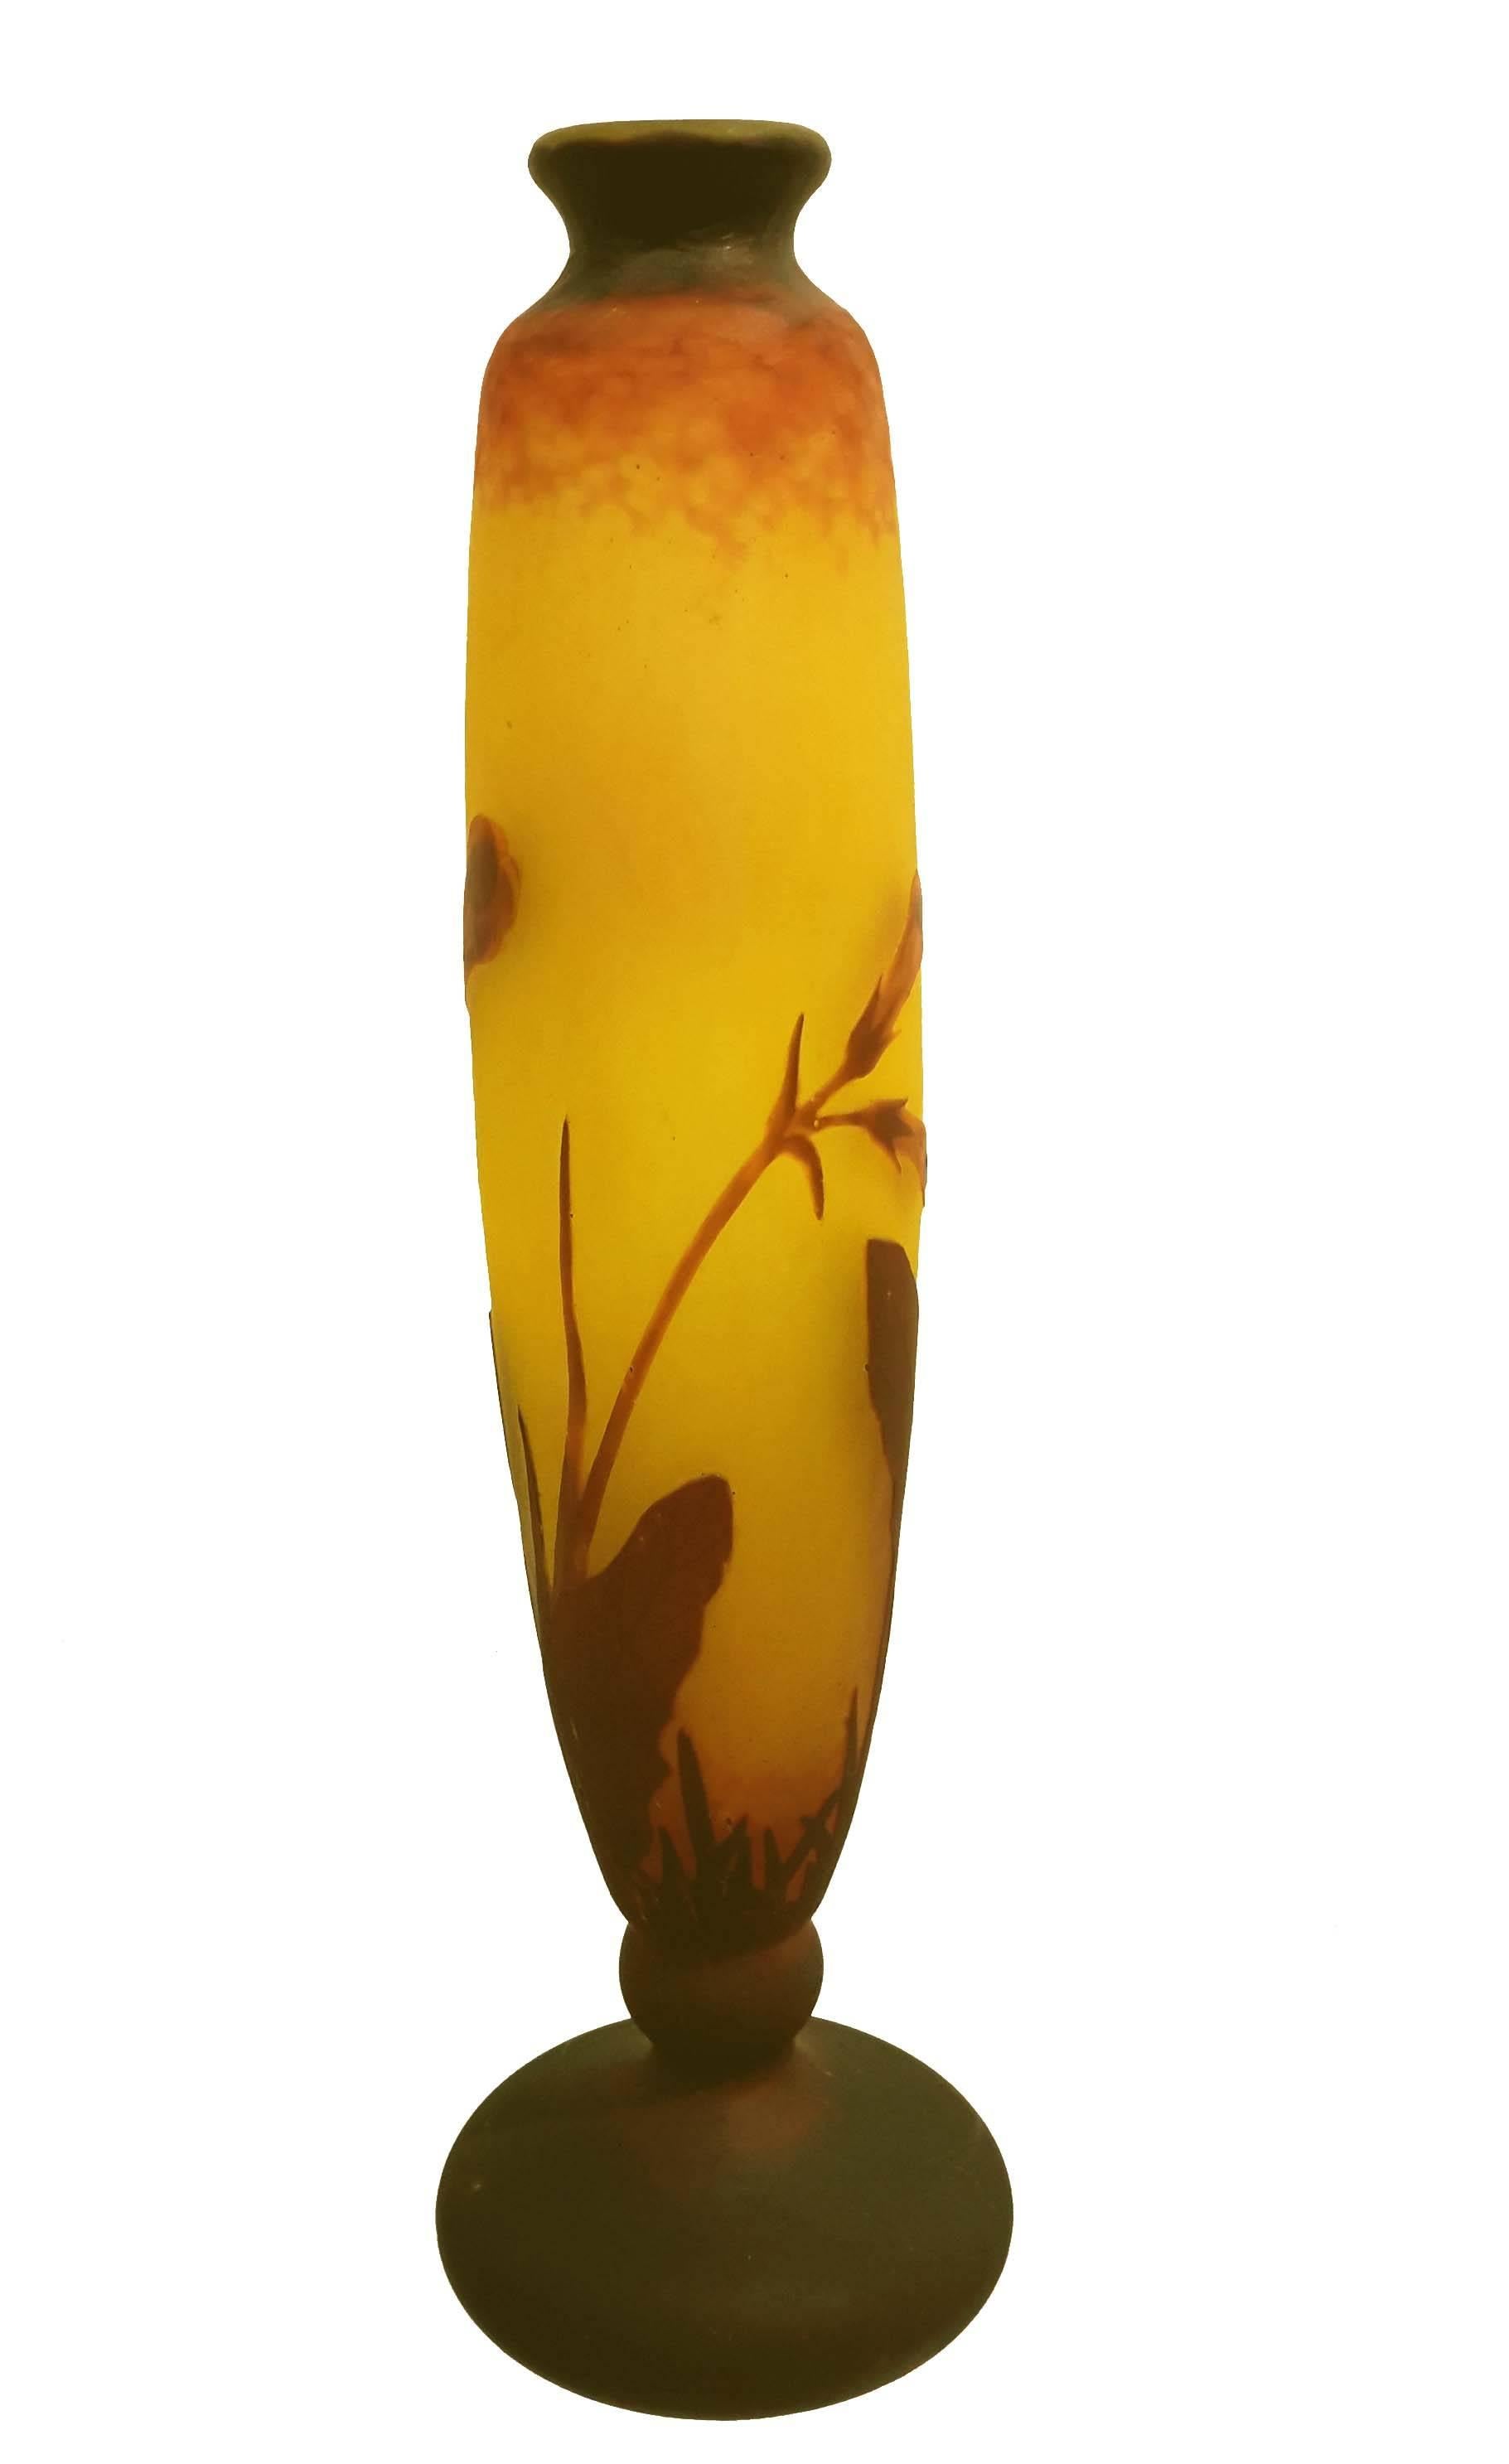 A Daum Nancy cameo glass vase, France, early 20th century. Tapered vase with floral decoration in Autumnal colors, engraved signature.
French, 1901-1925.